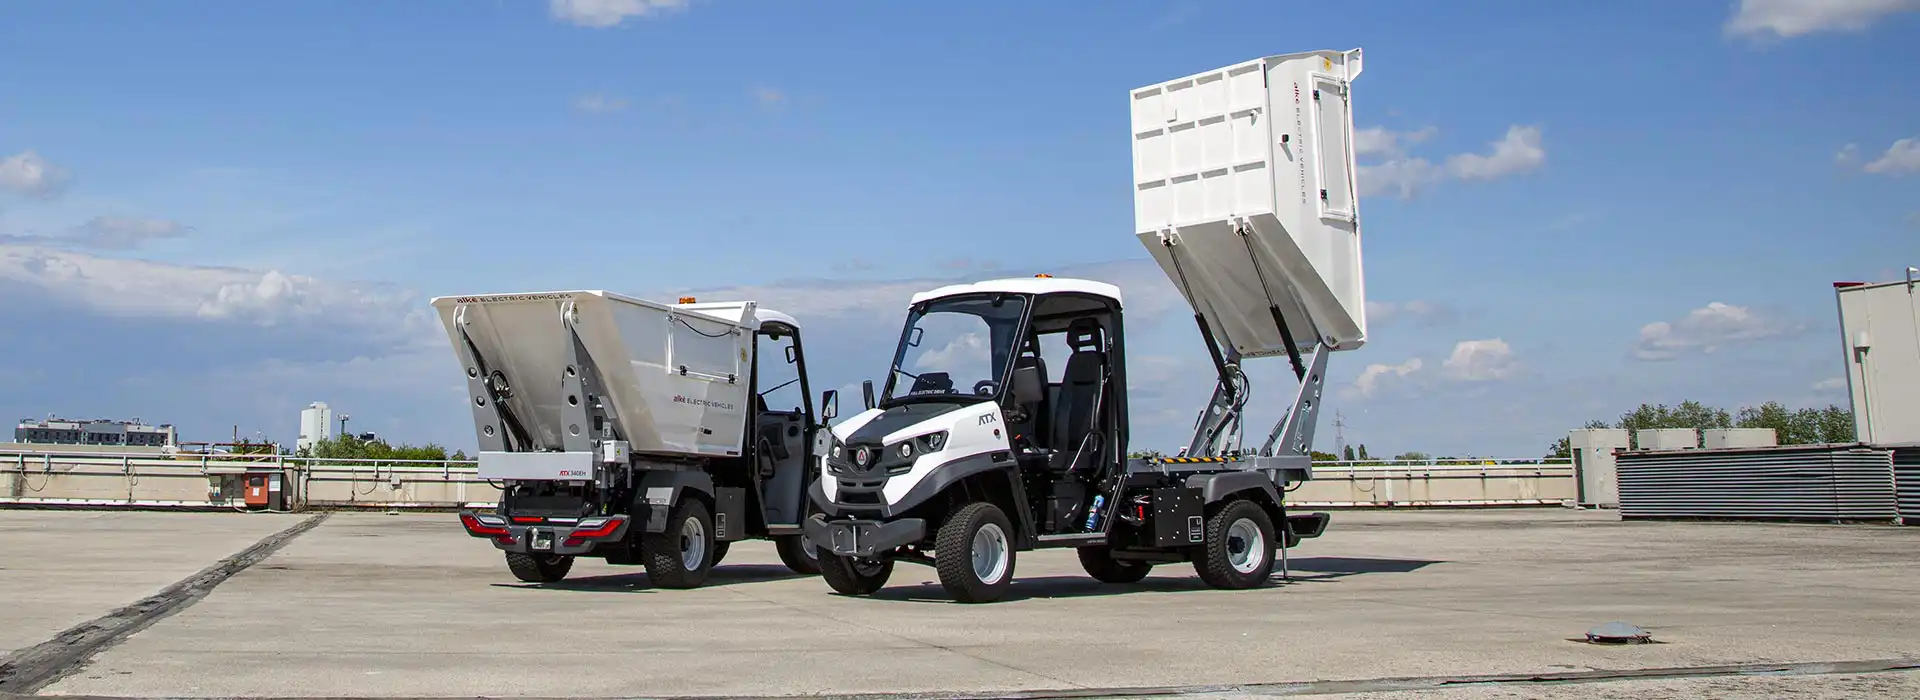 Solid Waste vehicles with bin lift system Alke'